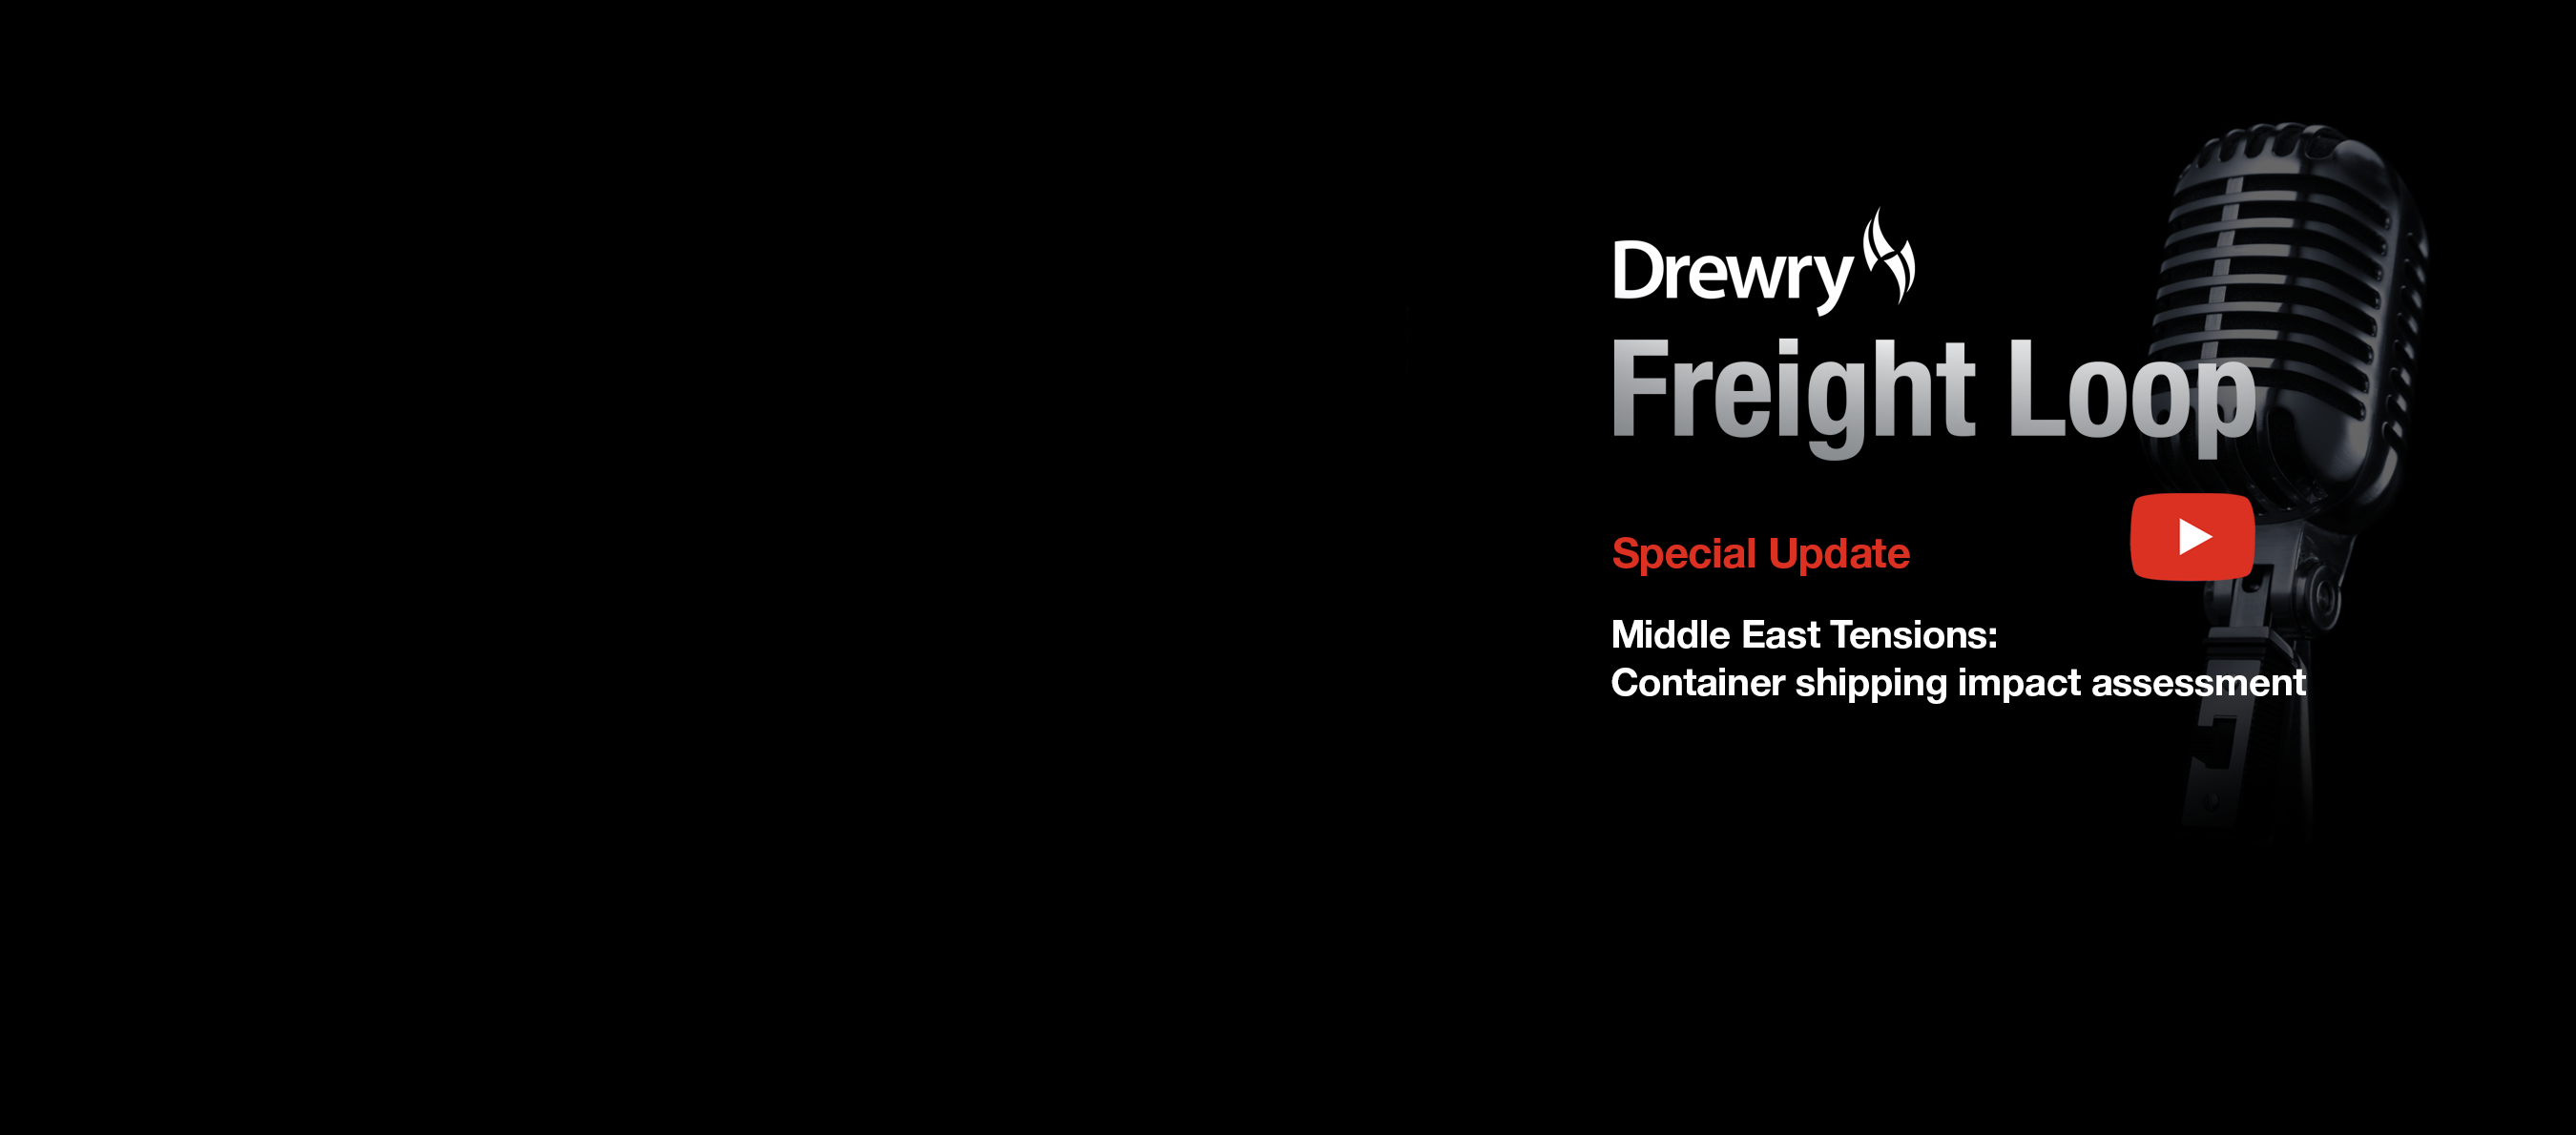 /container-insight-weekly/weekly-feature-articles/freight-loop---middle-east-tensions---special-update